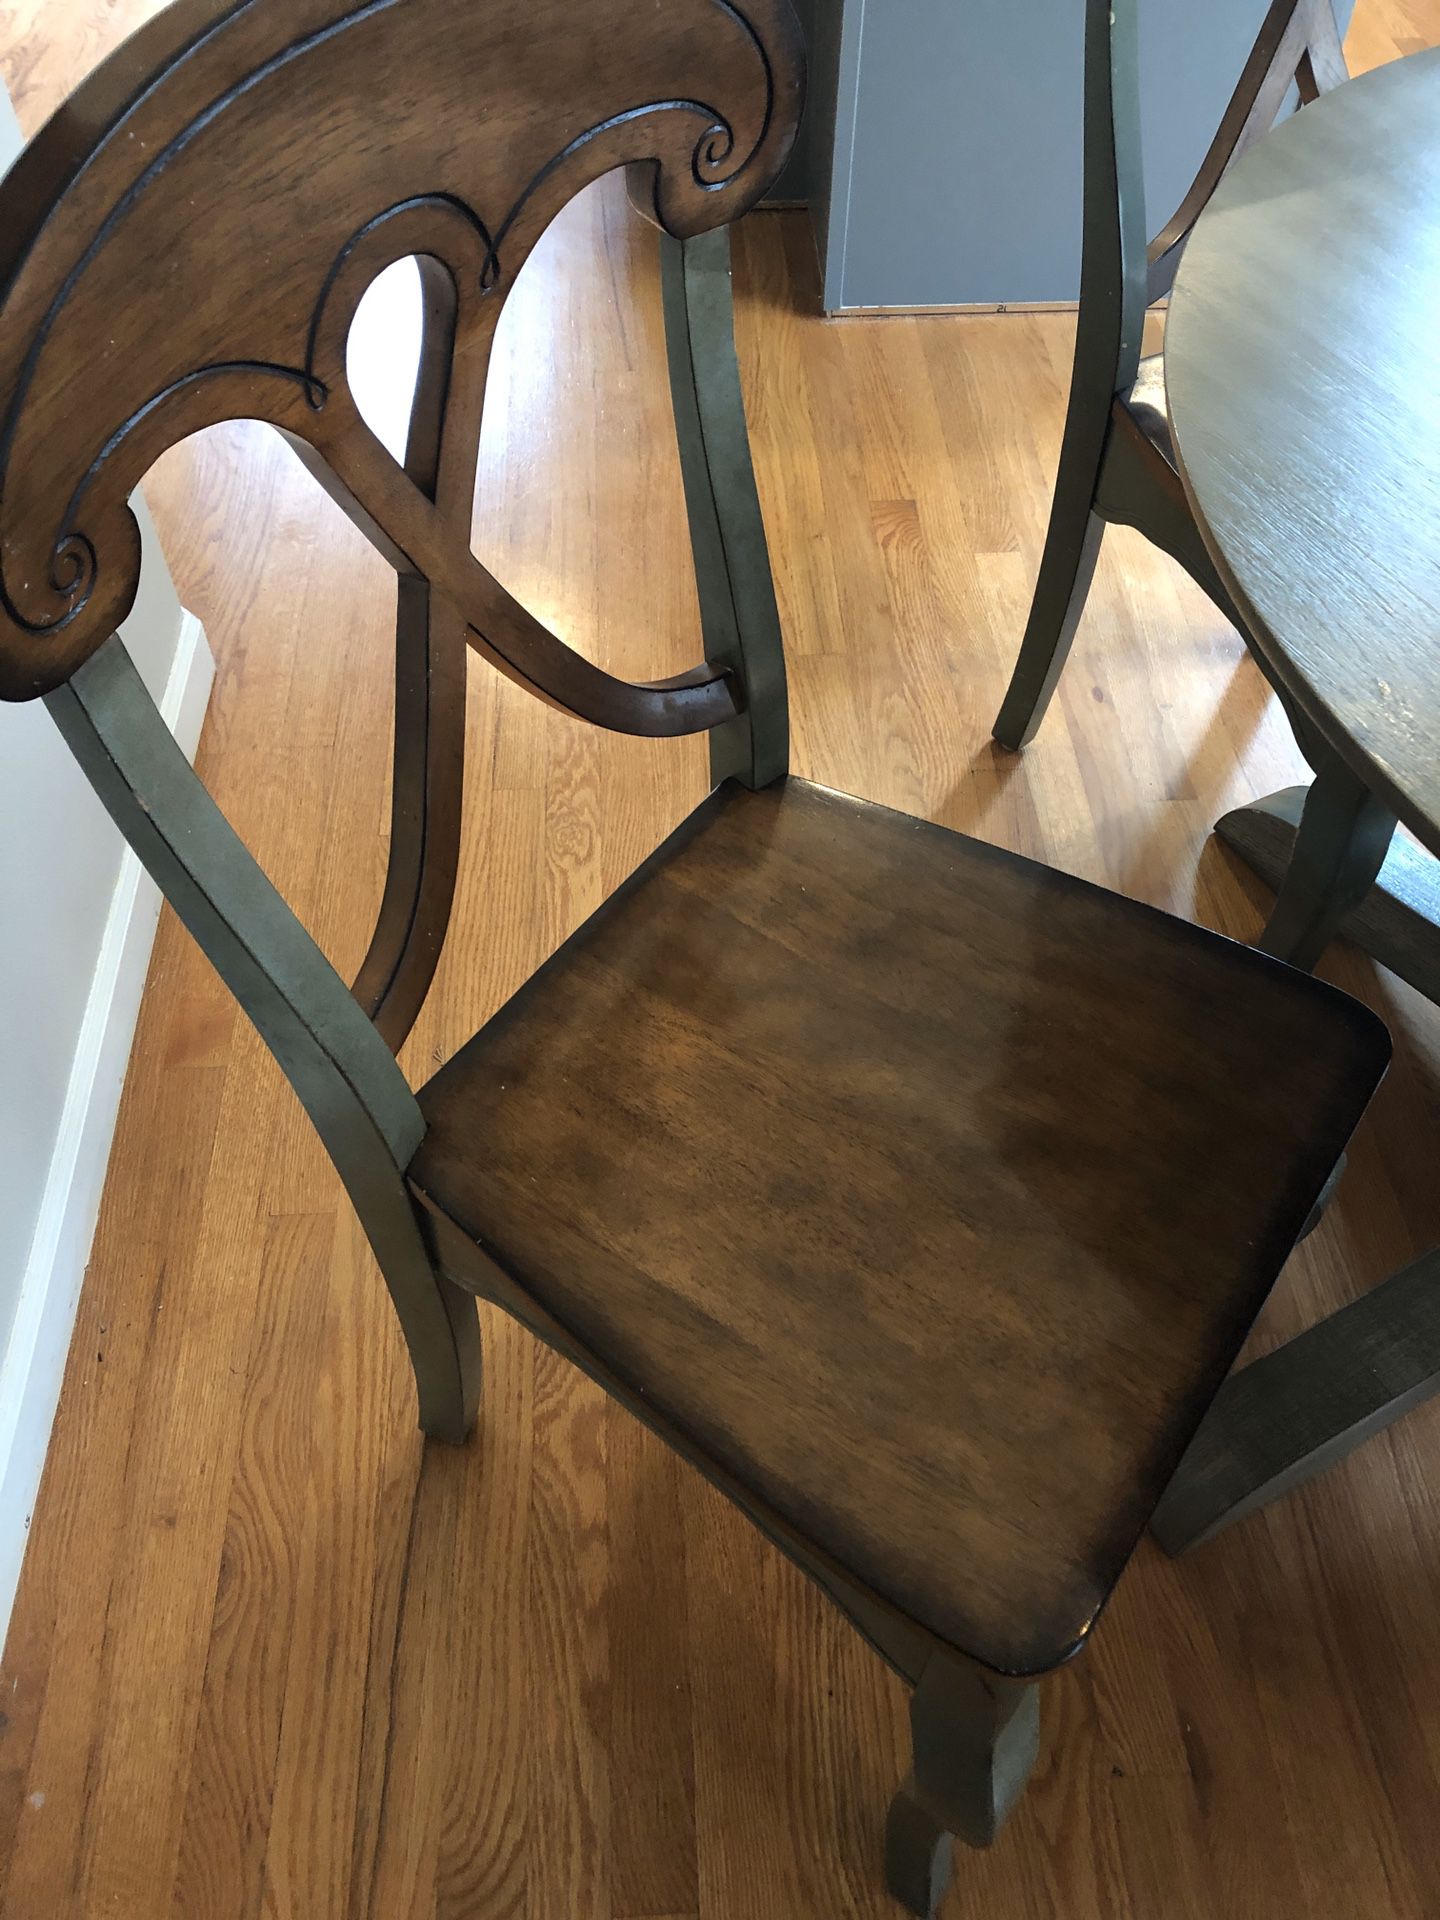 4 Pier 1 Dining or Kitchen Chairs